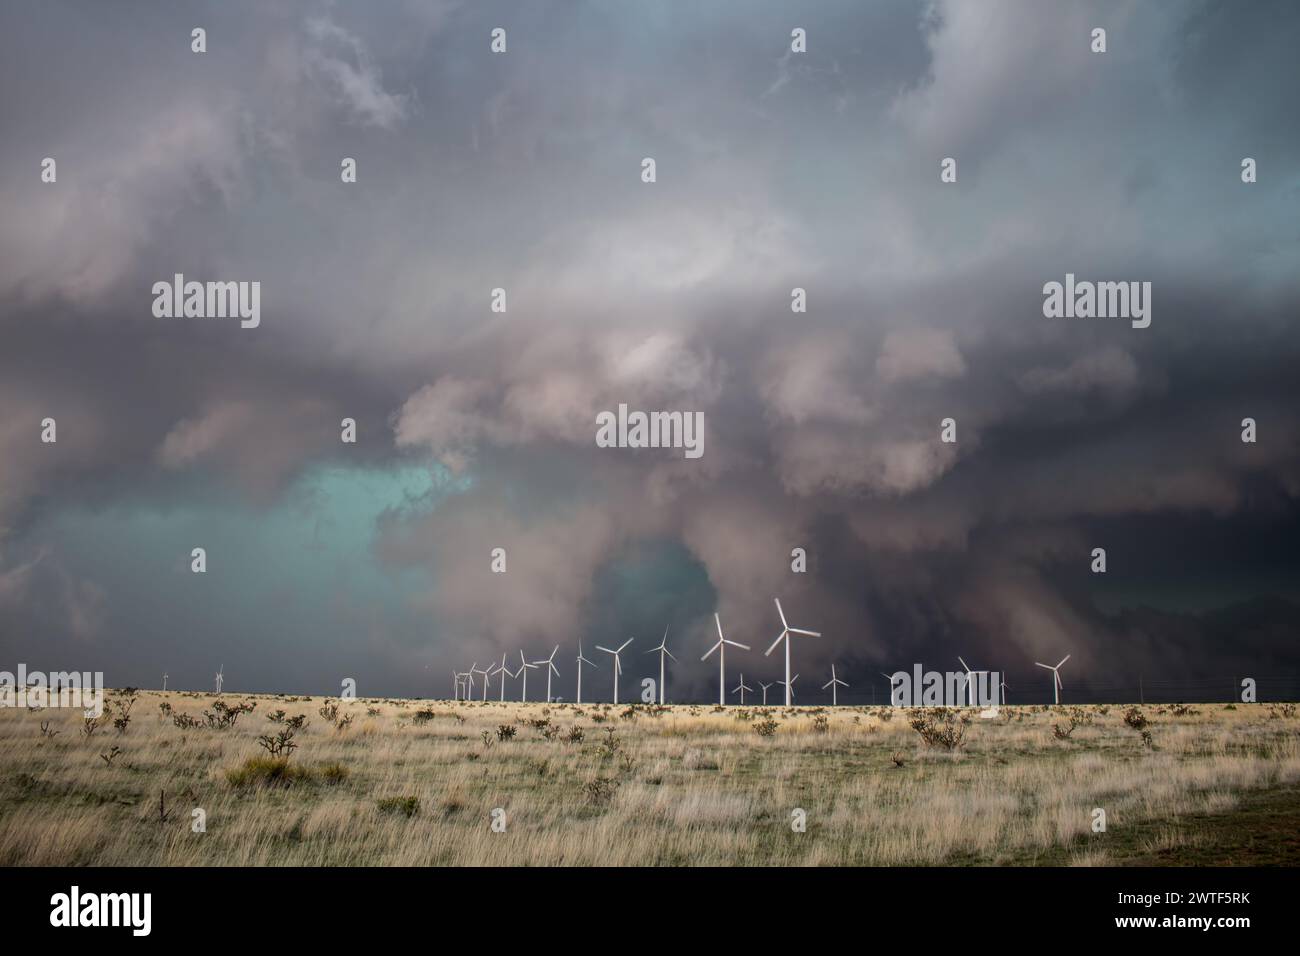 A wall cloud lowers almost to the ground, wind turbines spin, and the sky turns an eerie green as a massive supercell storm approaches. Stock Photo